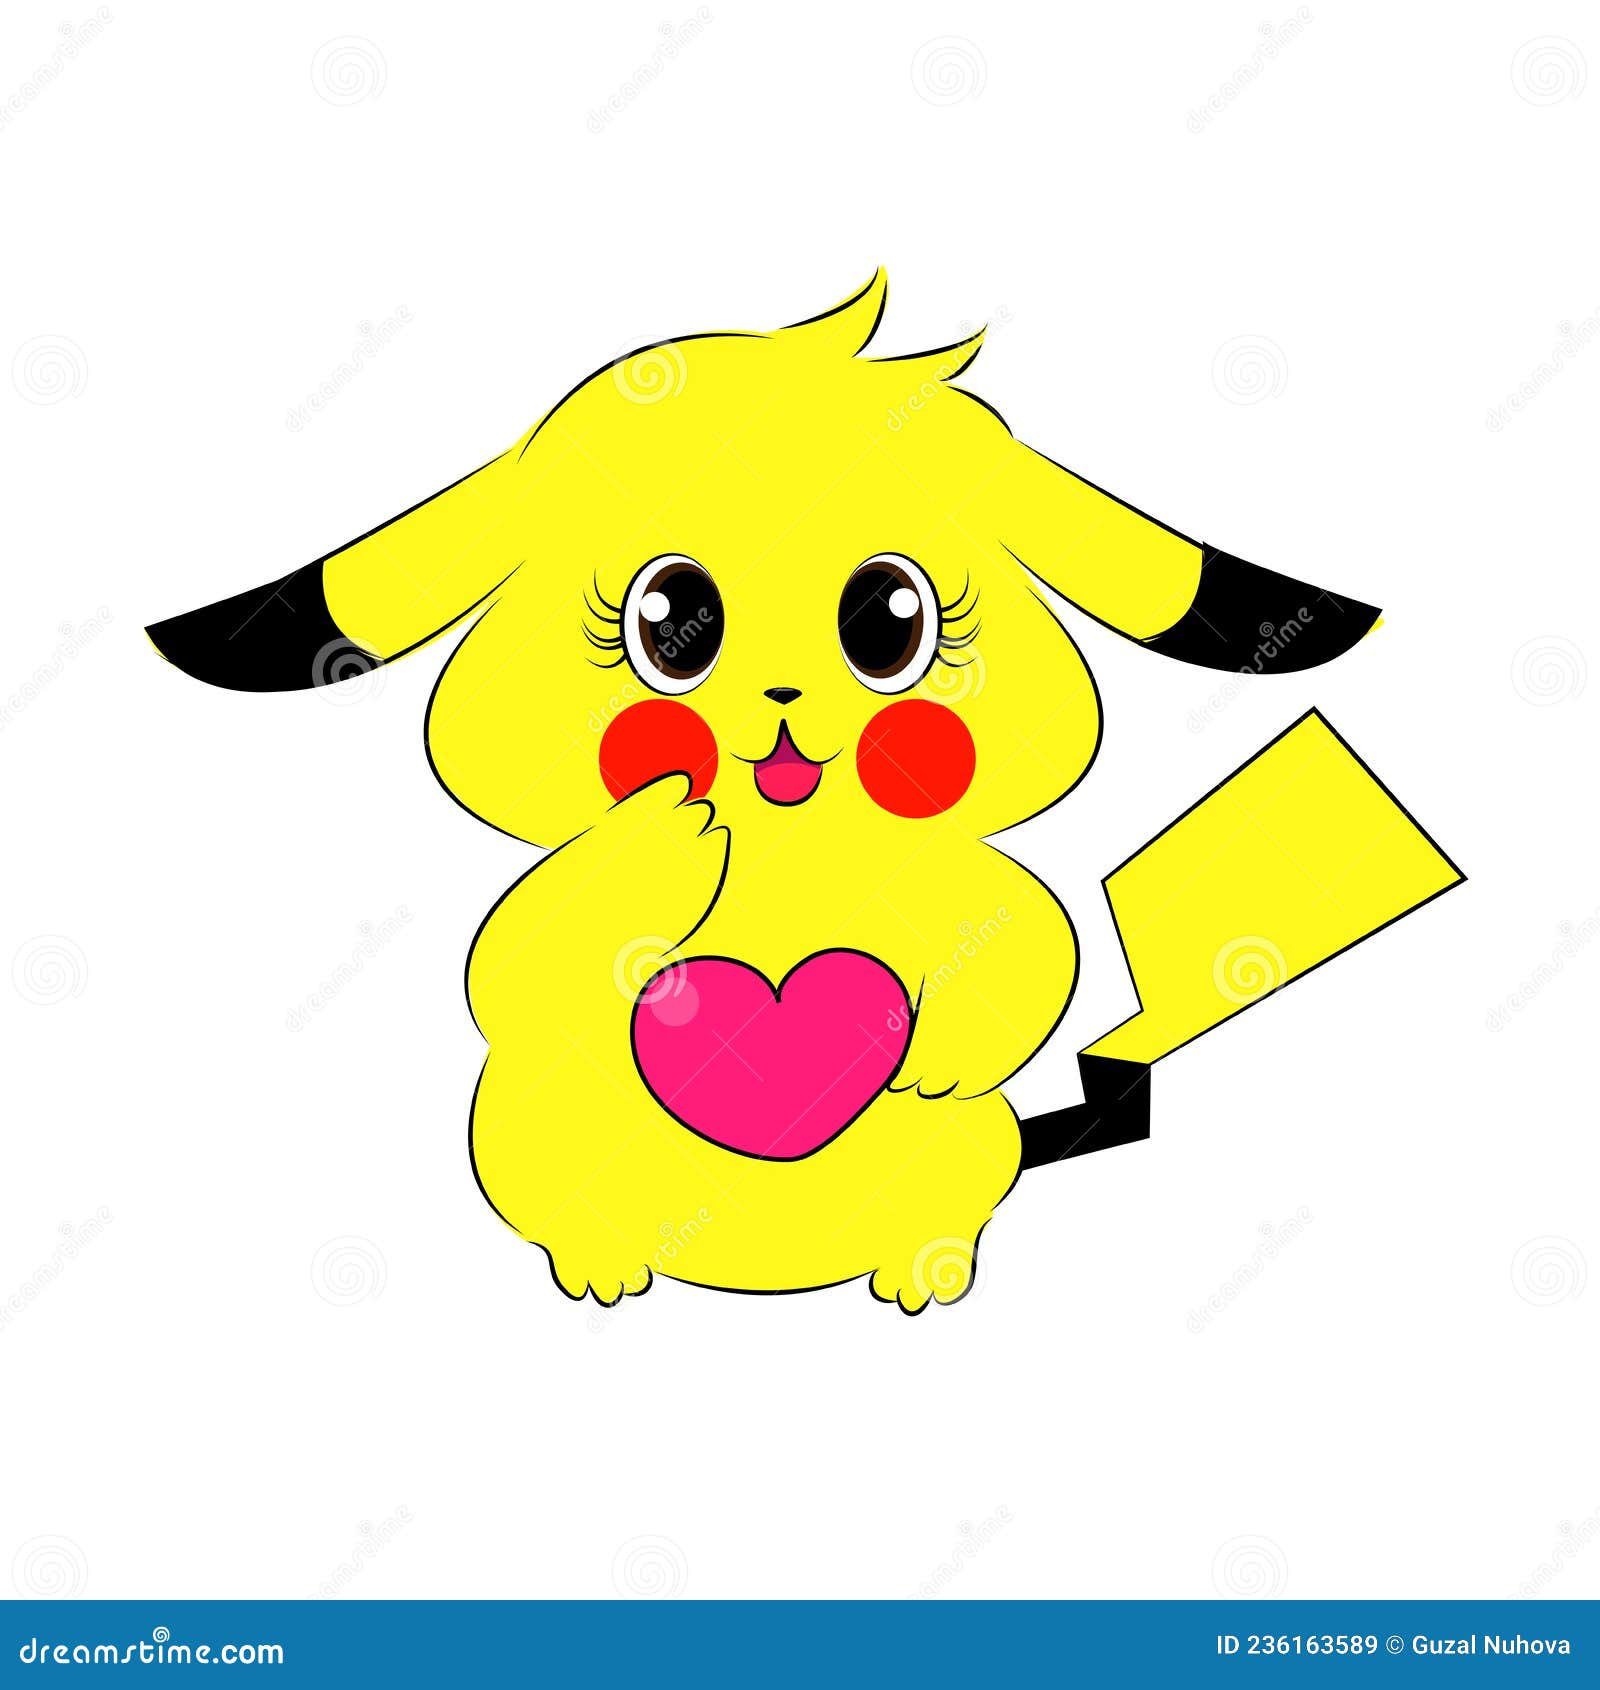 Anime Character Pikachu Pokemon Pikachu with Heart Emotions Anime Character Pikachu  Pokemon Print T-shirt Valentine S Editorial Stock Image - Illustration of  action, book: 236163589